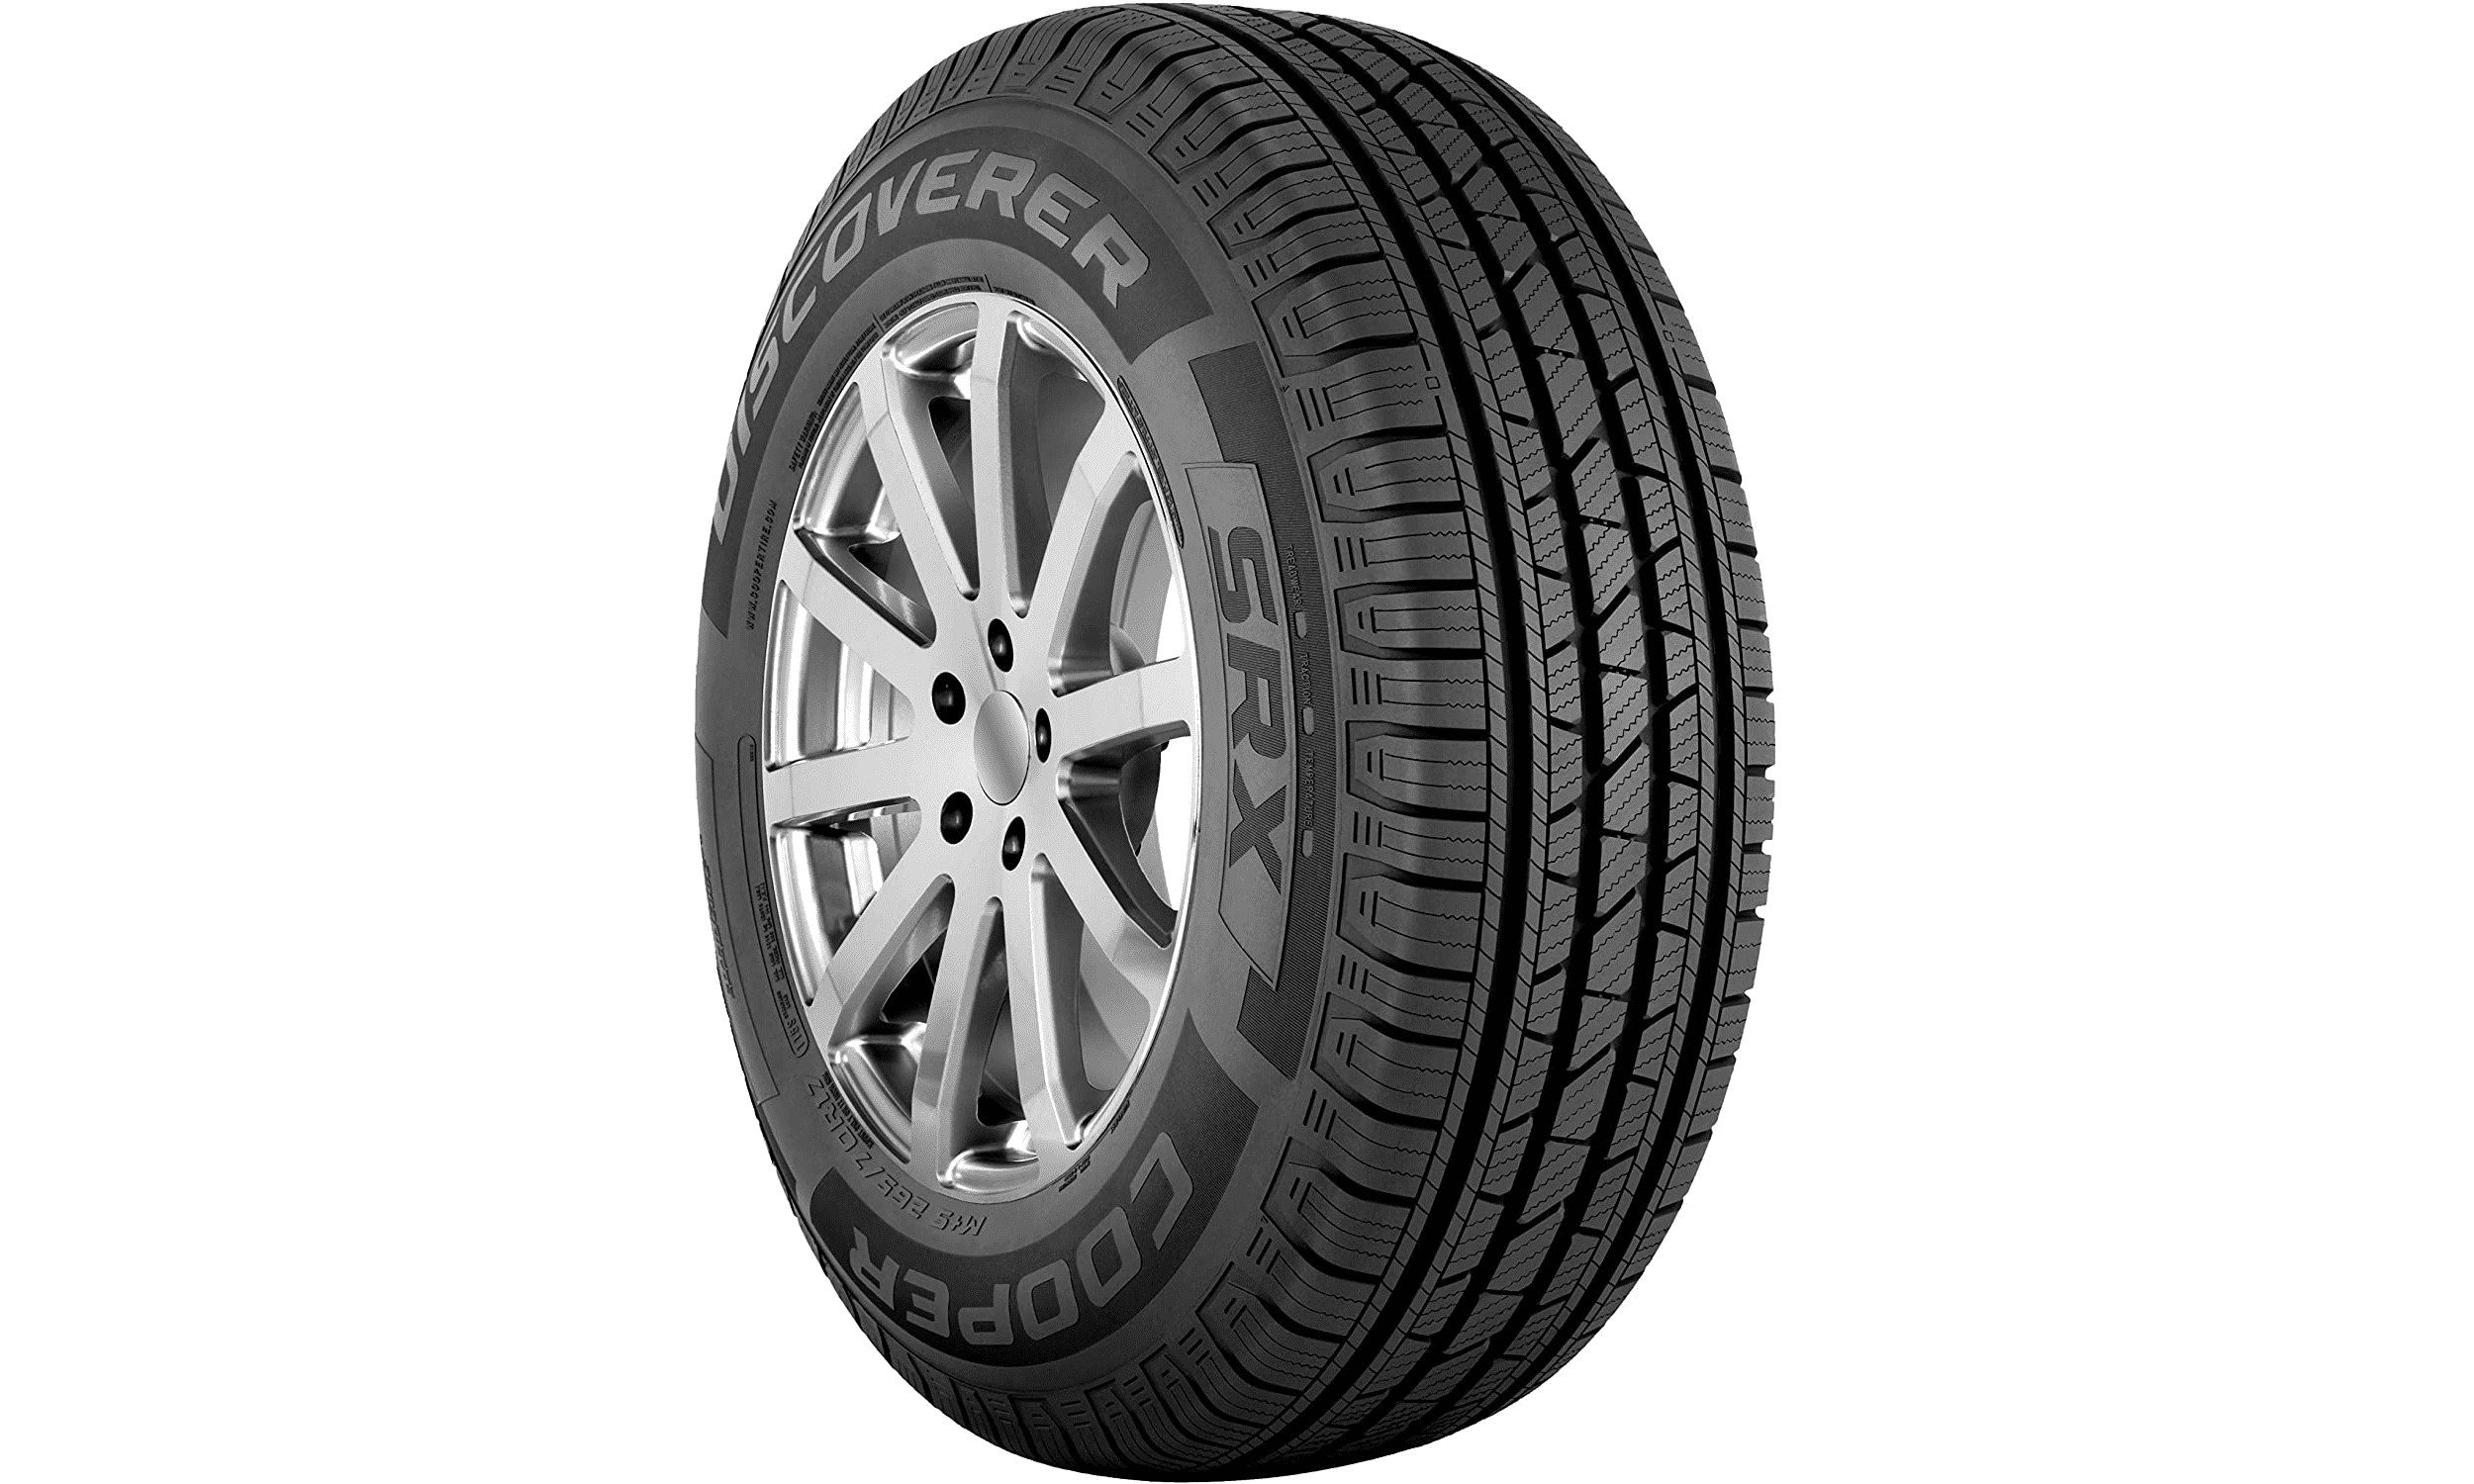 cooper-discoverer-srx-tire-review-tire-space-tires-reviews-all-brands